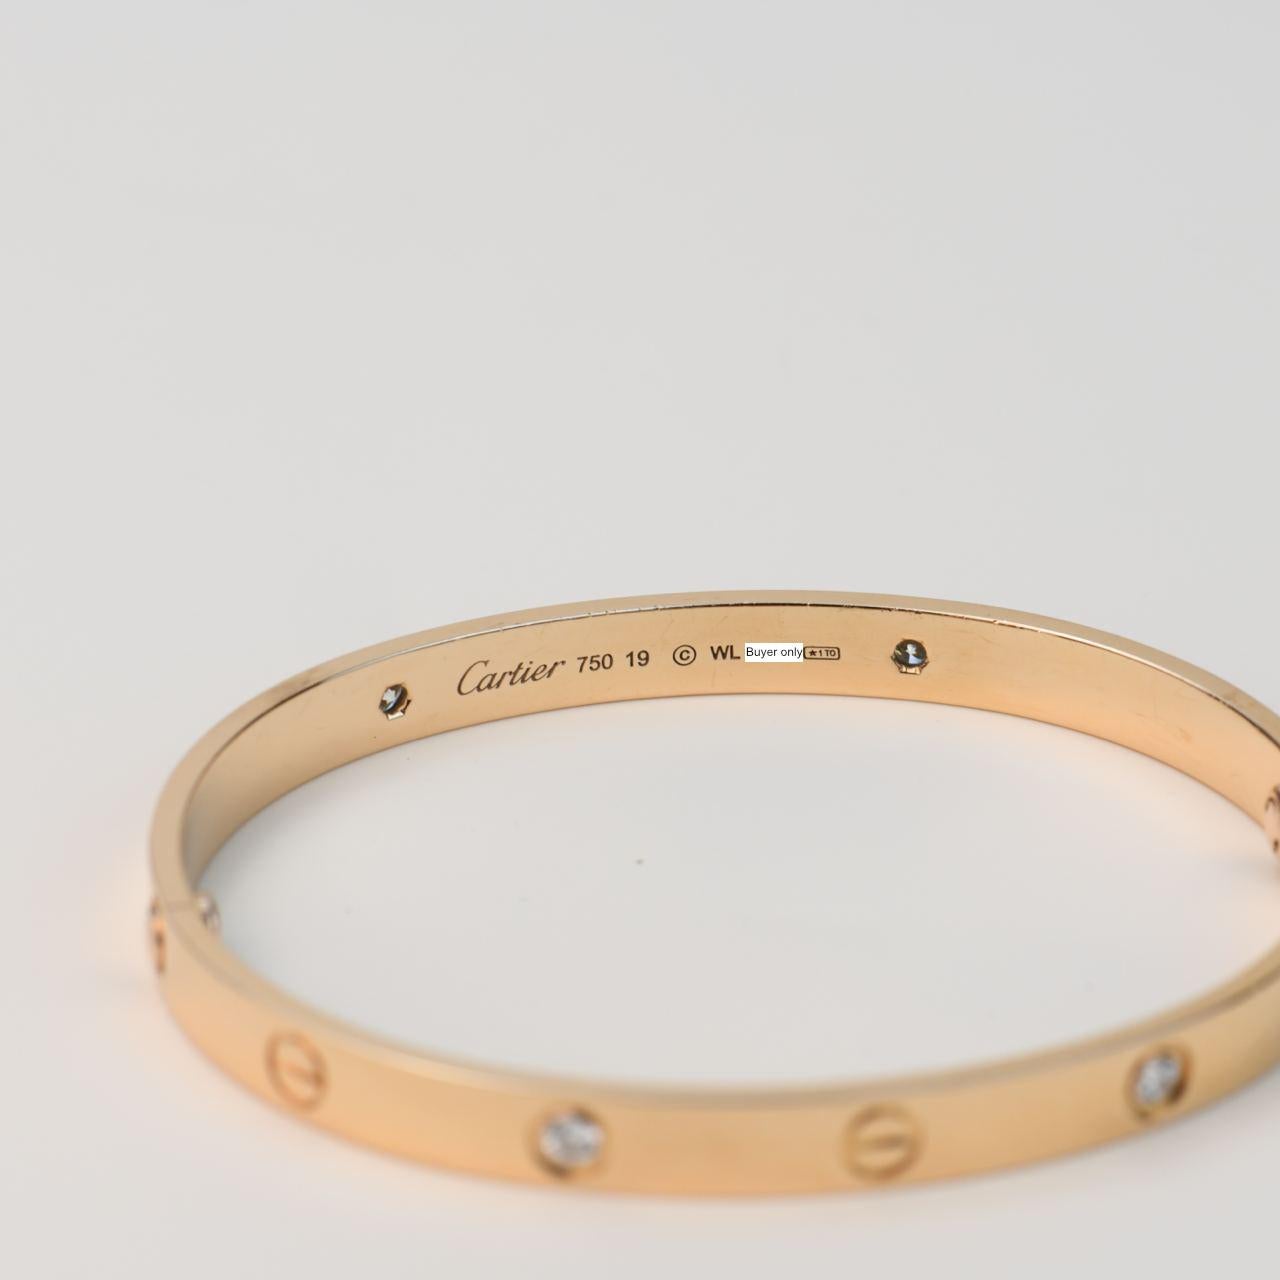 Cartier Love Bracelet 4 Diamonds Rose Gold Size 19 In Excellent Condition For Sale In Banbury, GB